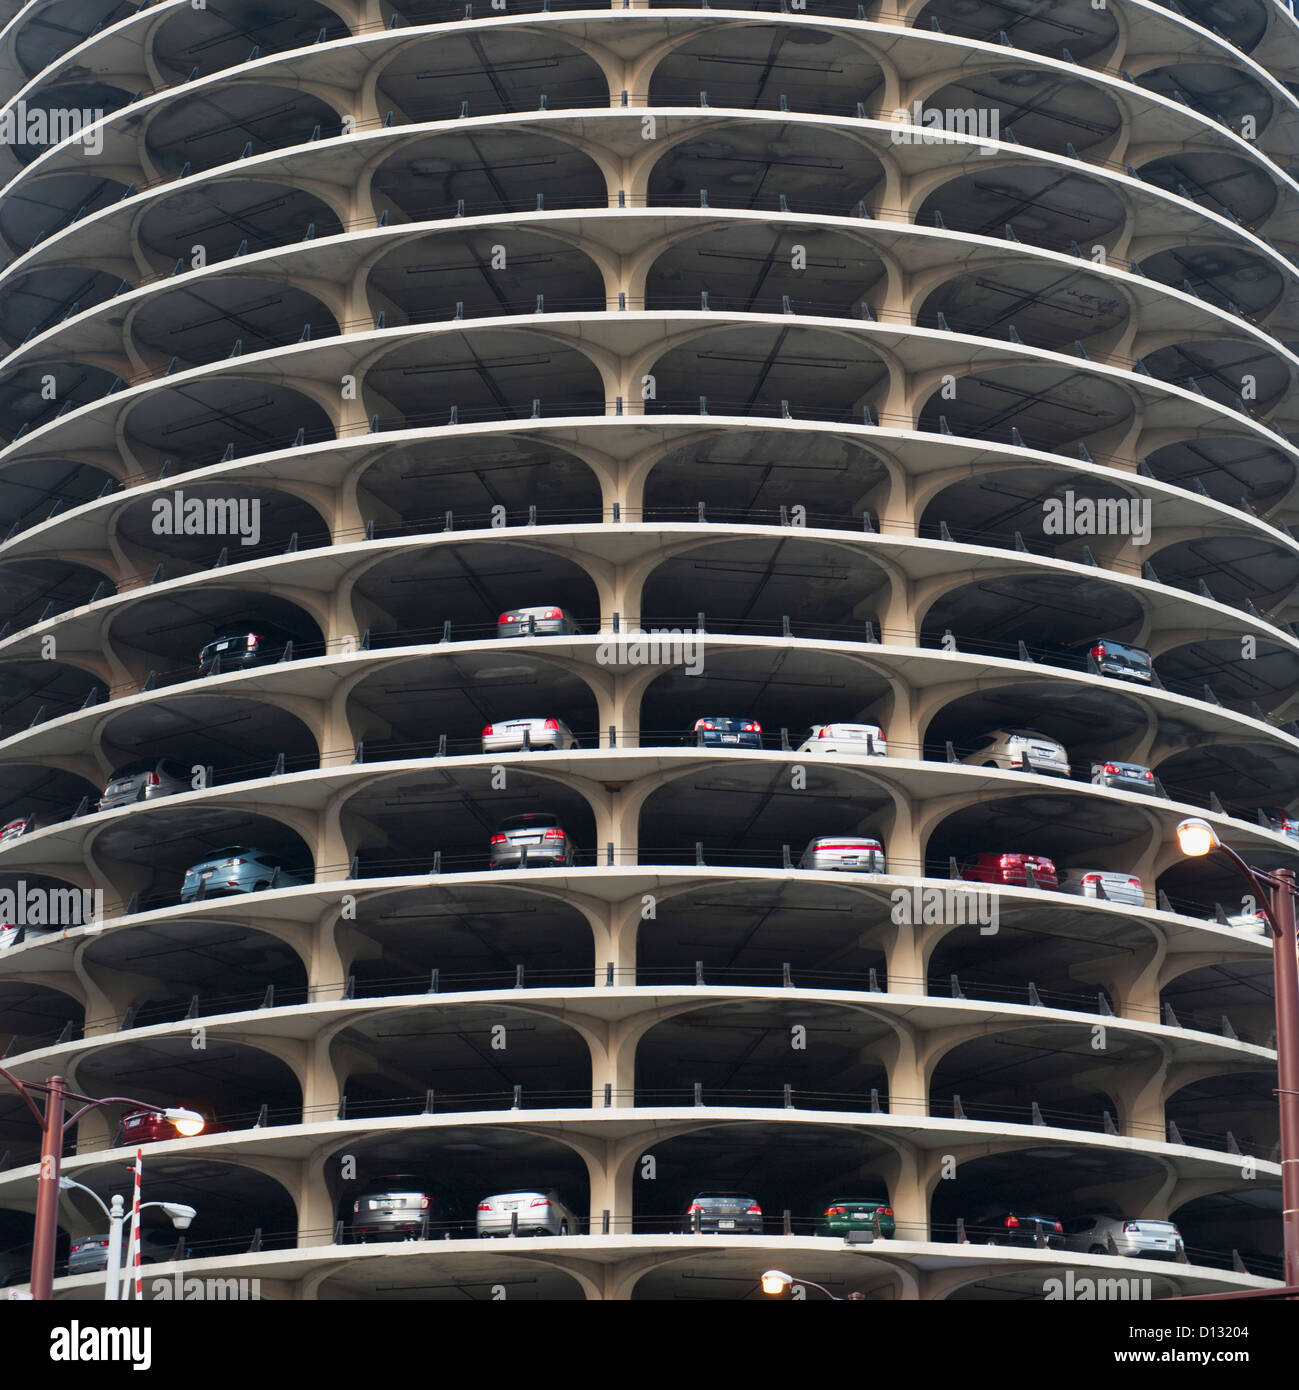 A Parking Garage With Many Levels In A Curve; Chicago Illinois United States Of America Stock Photo